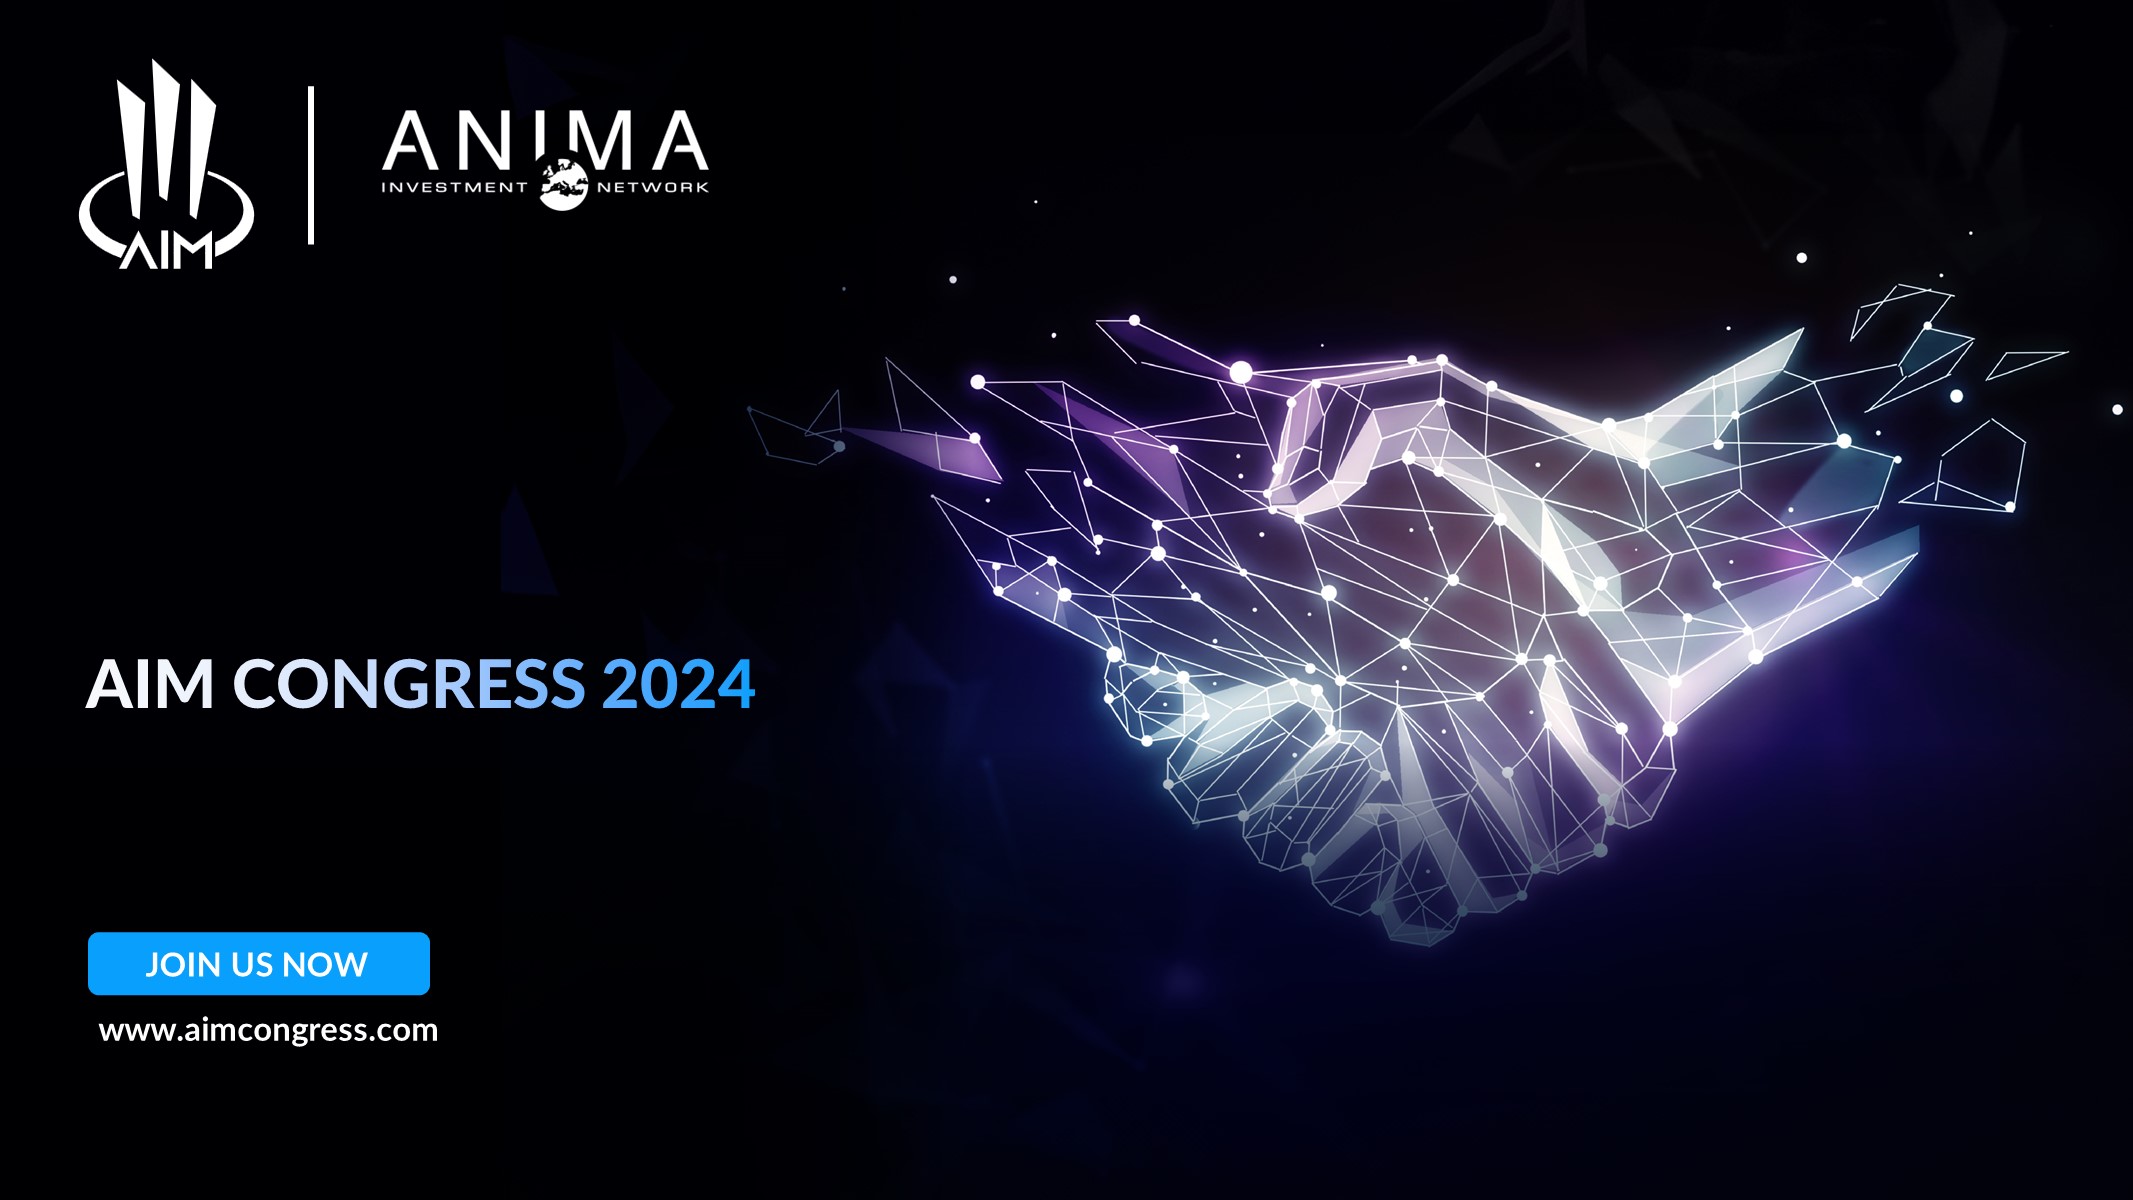 CONFERENCE & B2B AIM 2024 (Annual Investment Meeting) ANIMA